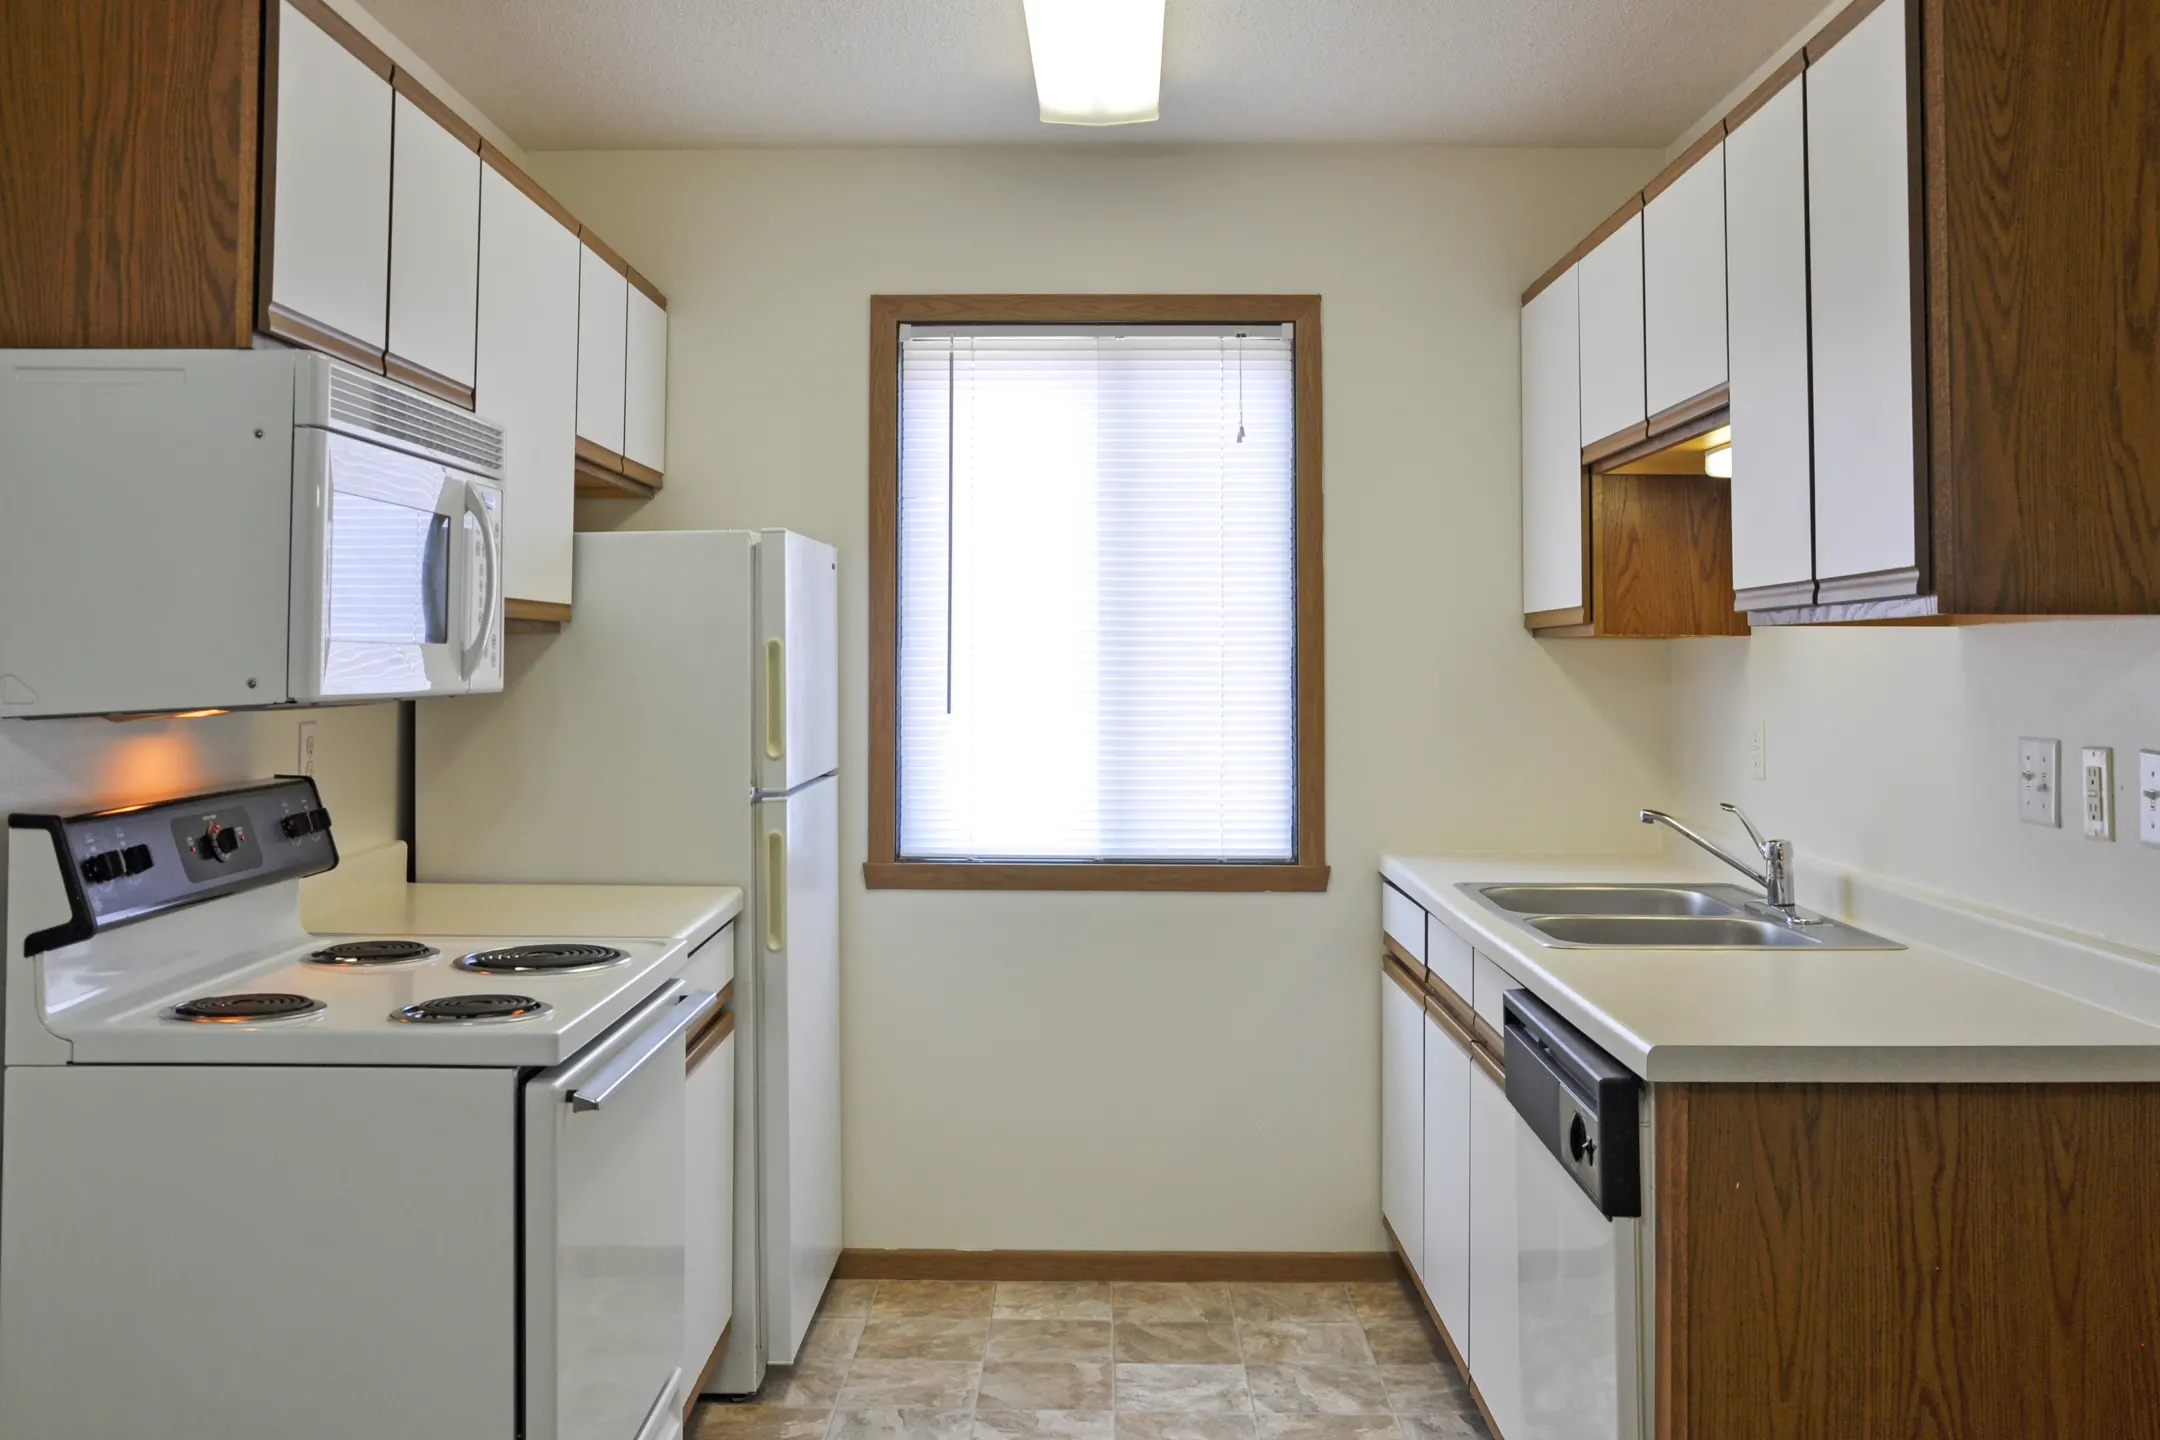 Kitchen - Orchid Place Apartments - Fargo, ND